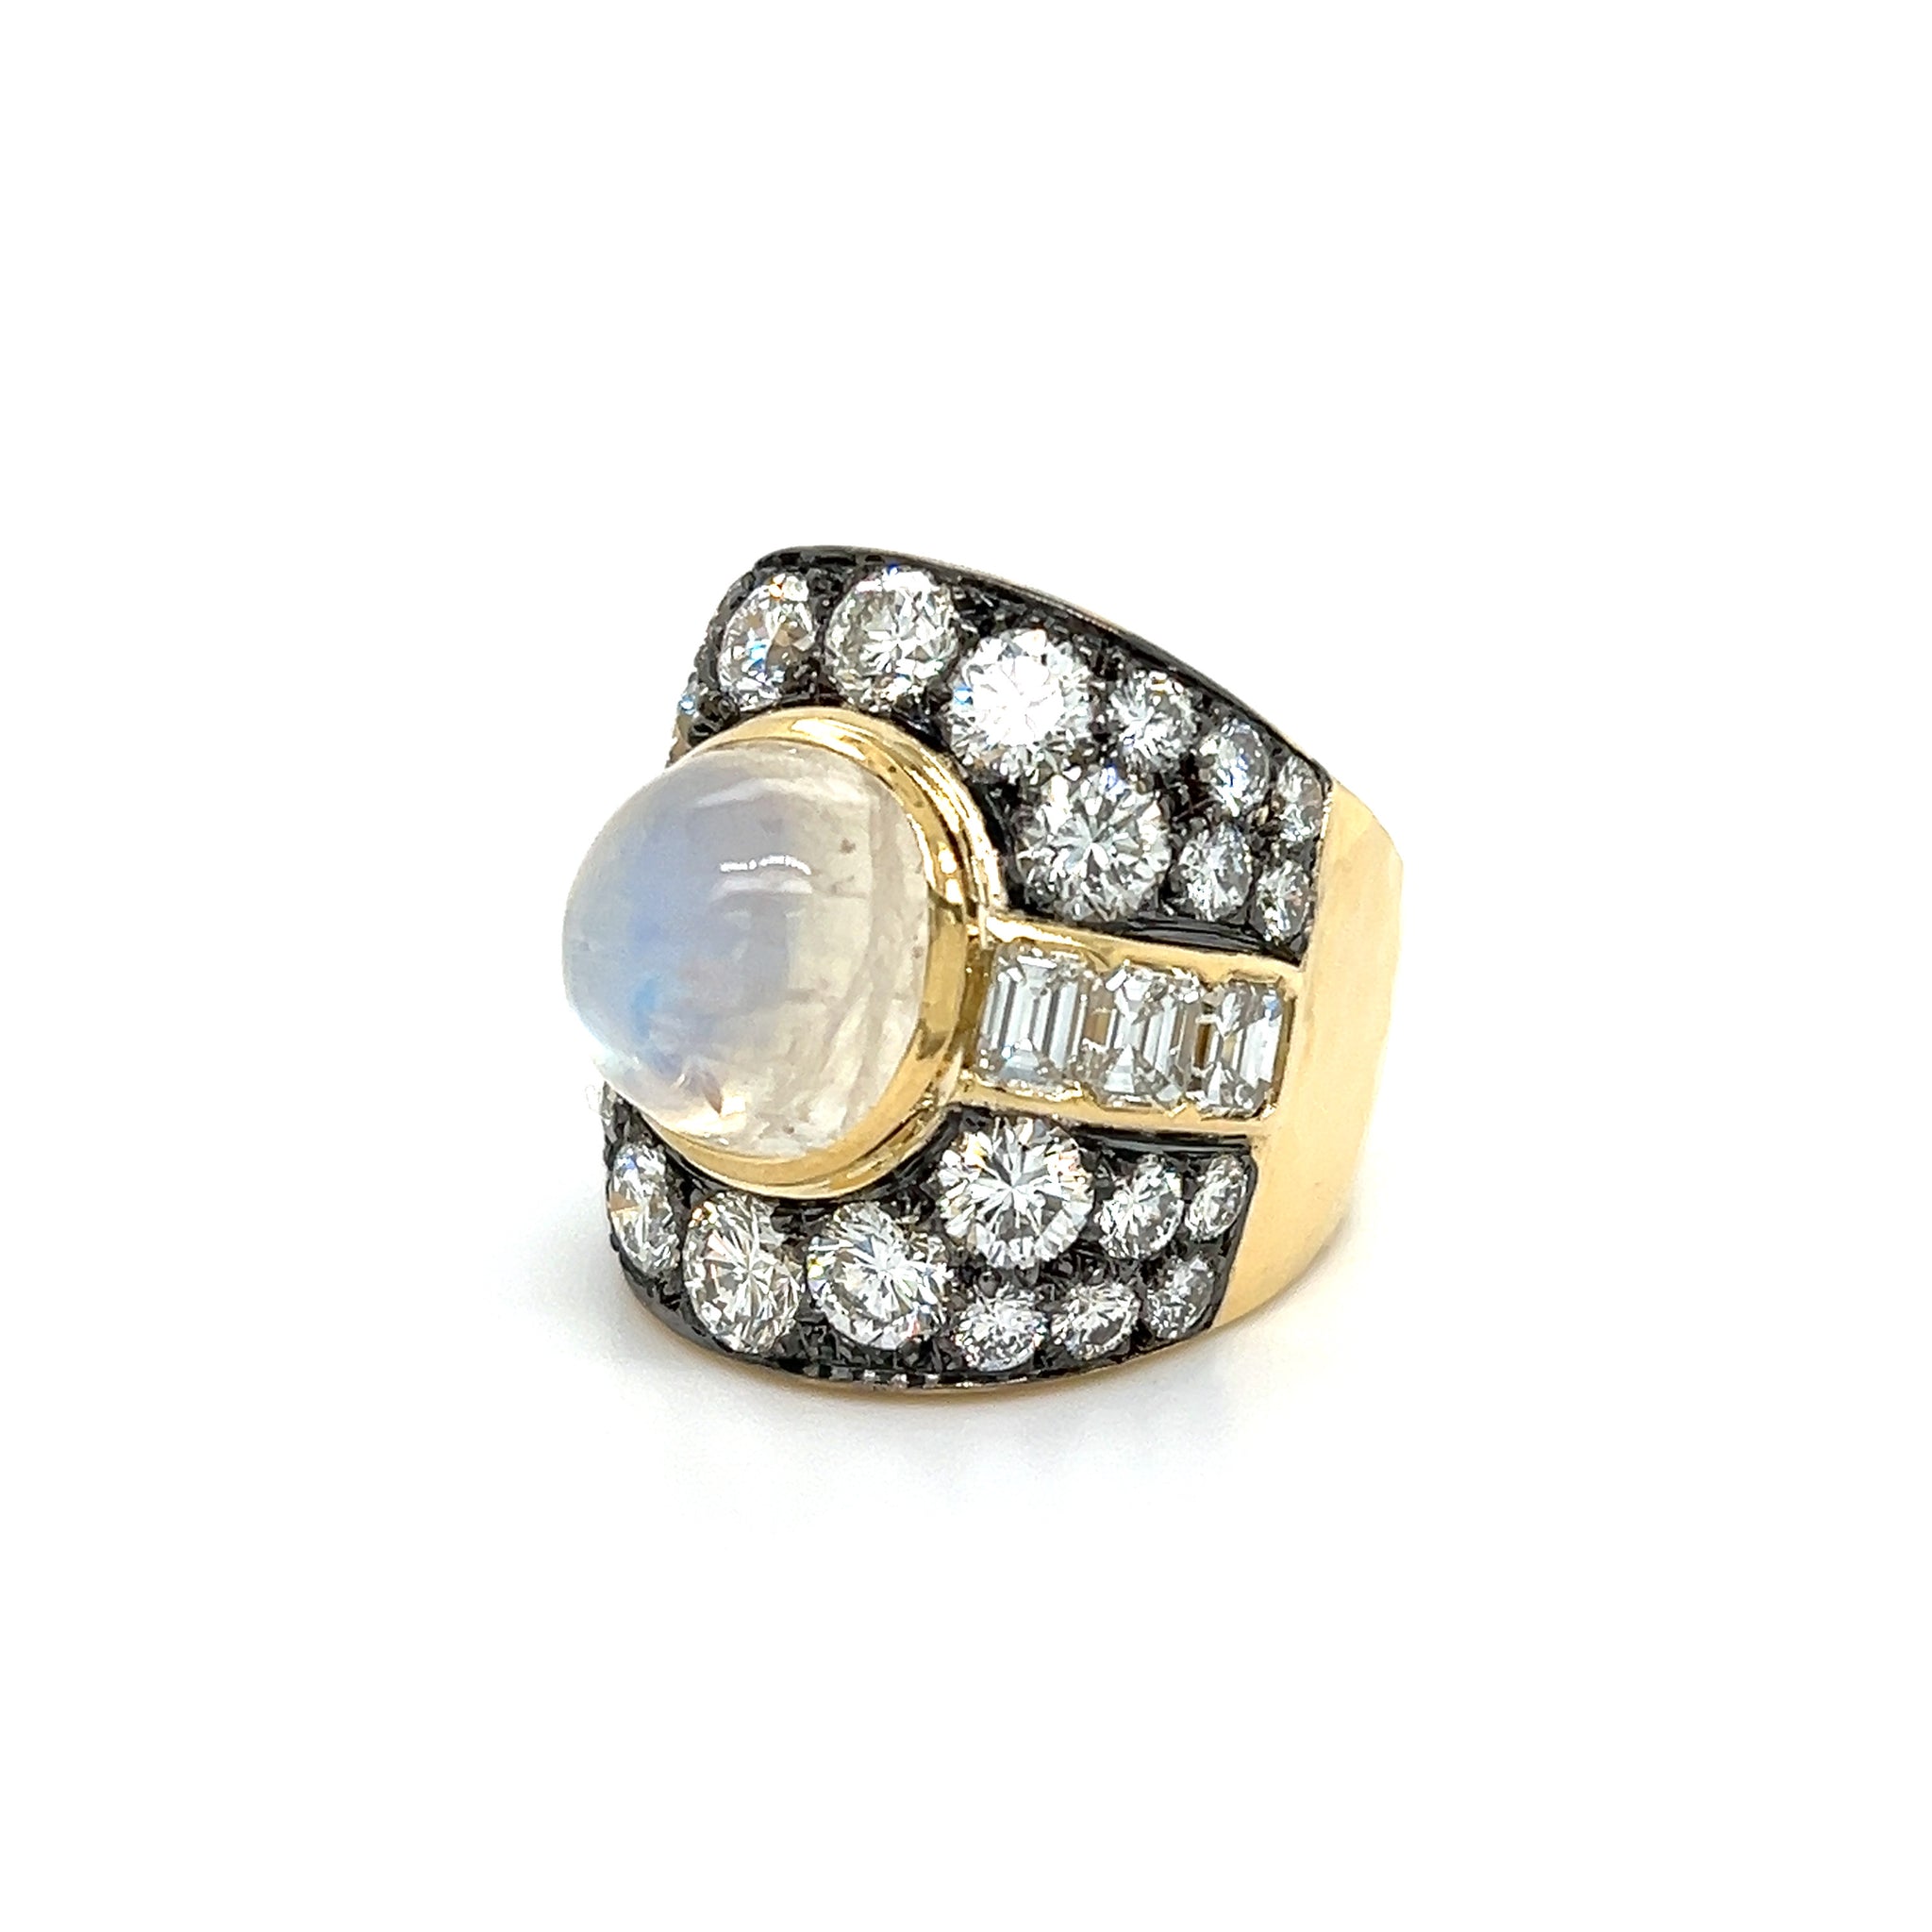 18kt Gold Cocktail Ring with Center Cabochon Moonstone